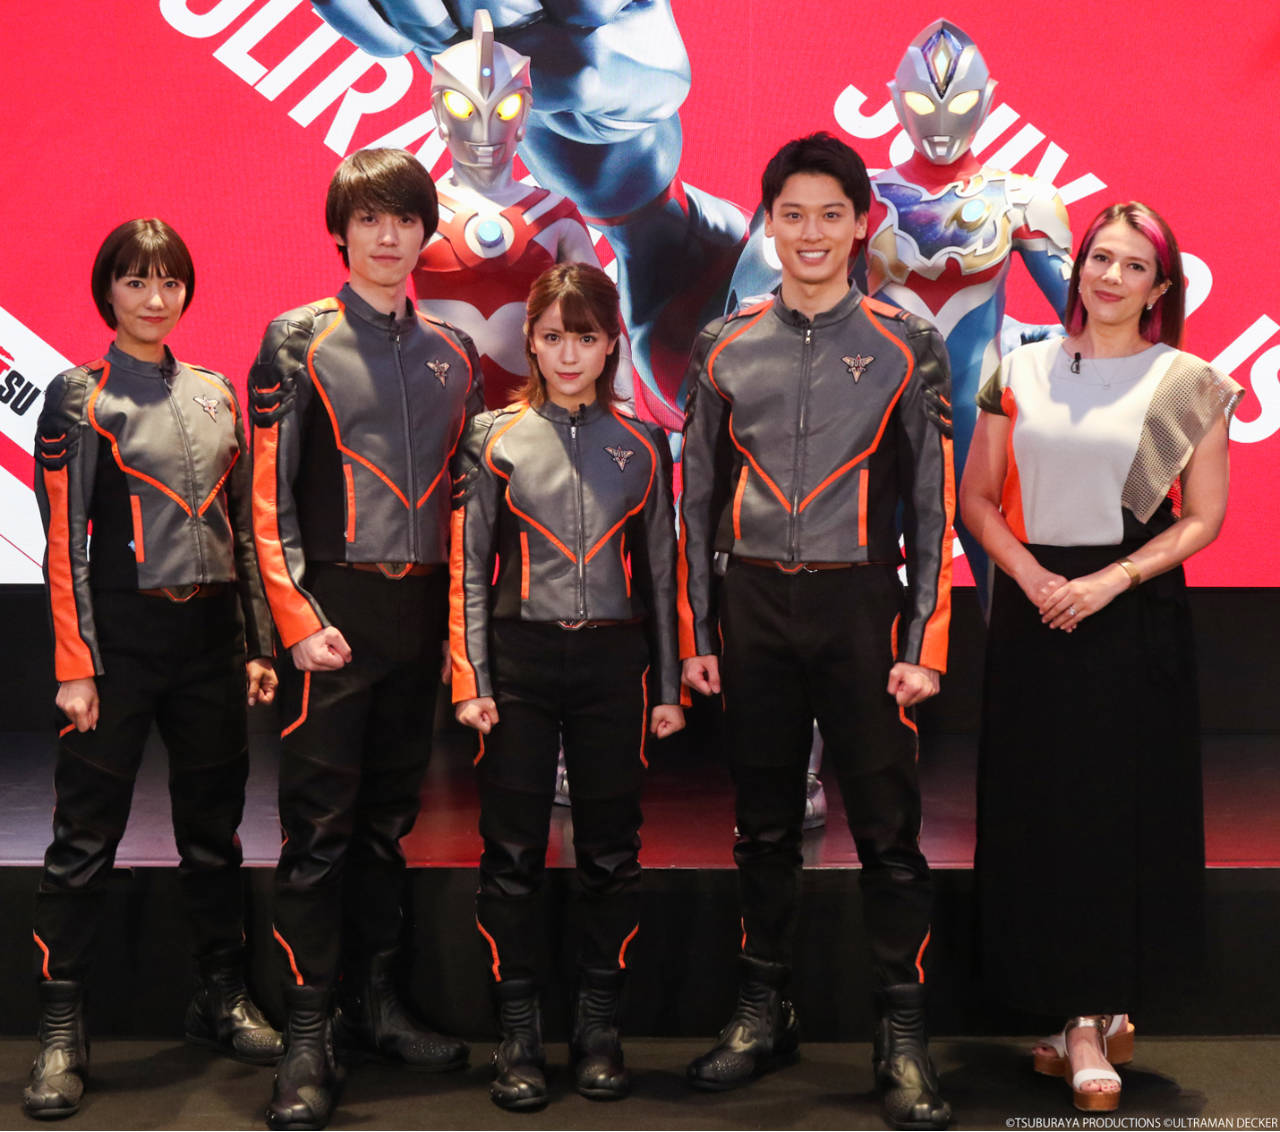 ULTRAMAN CONNECTION LIVE: ULTRAMAN DAY 2022 – WHAT HAPPENED?